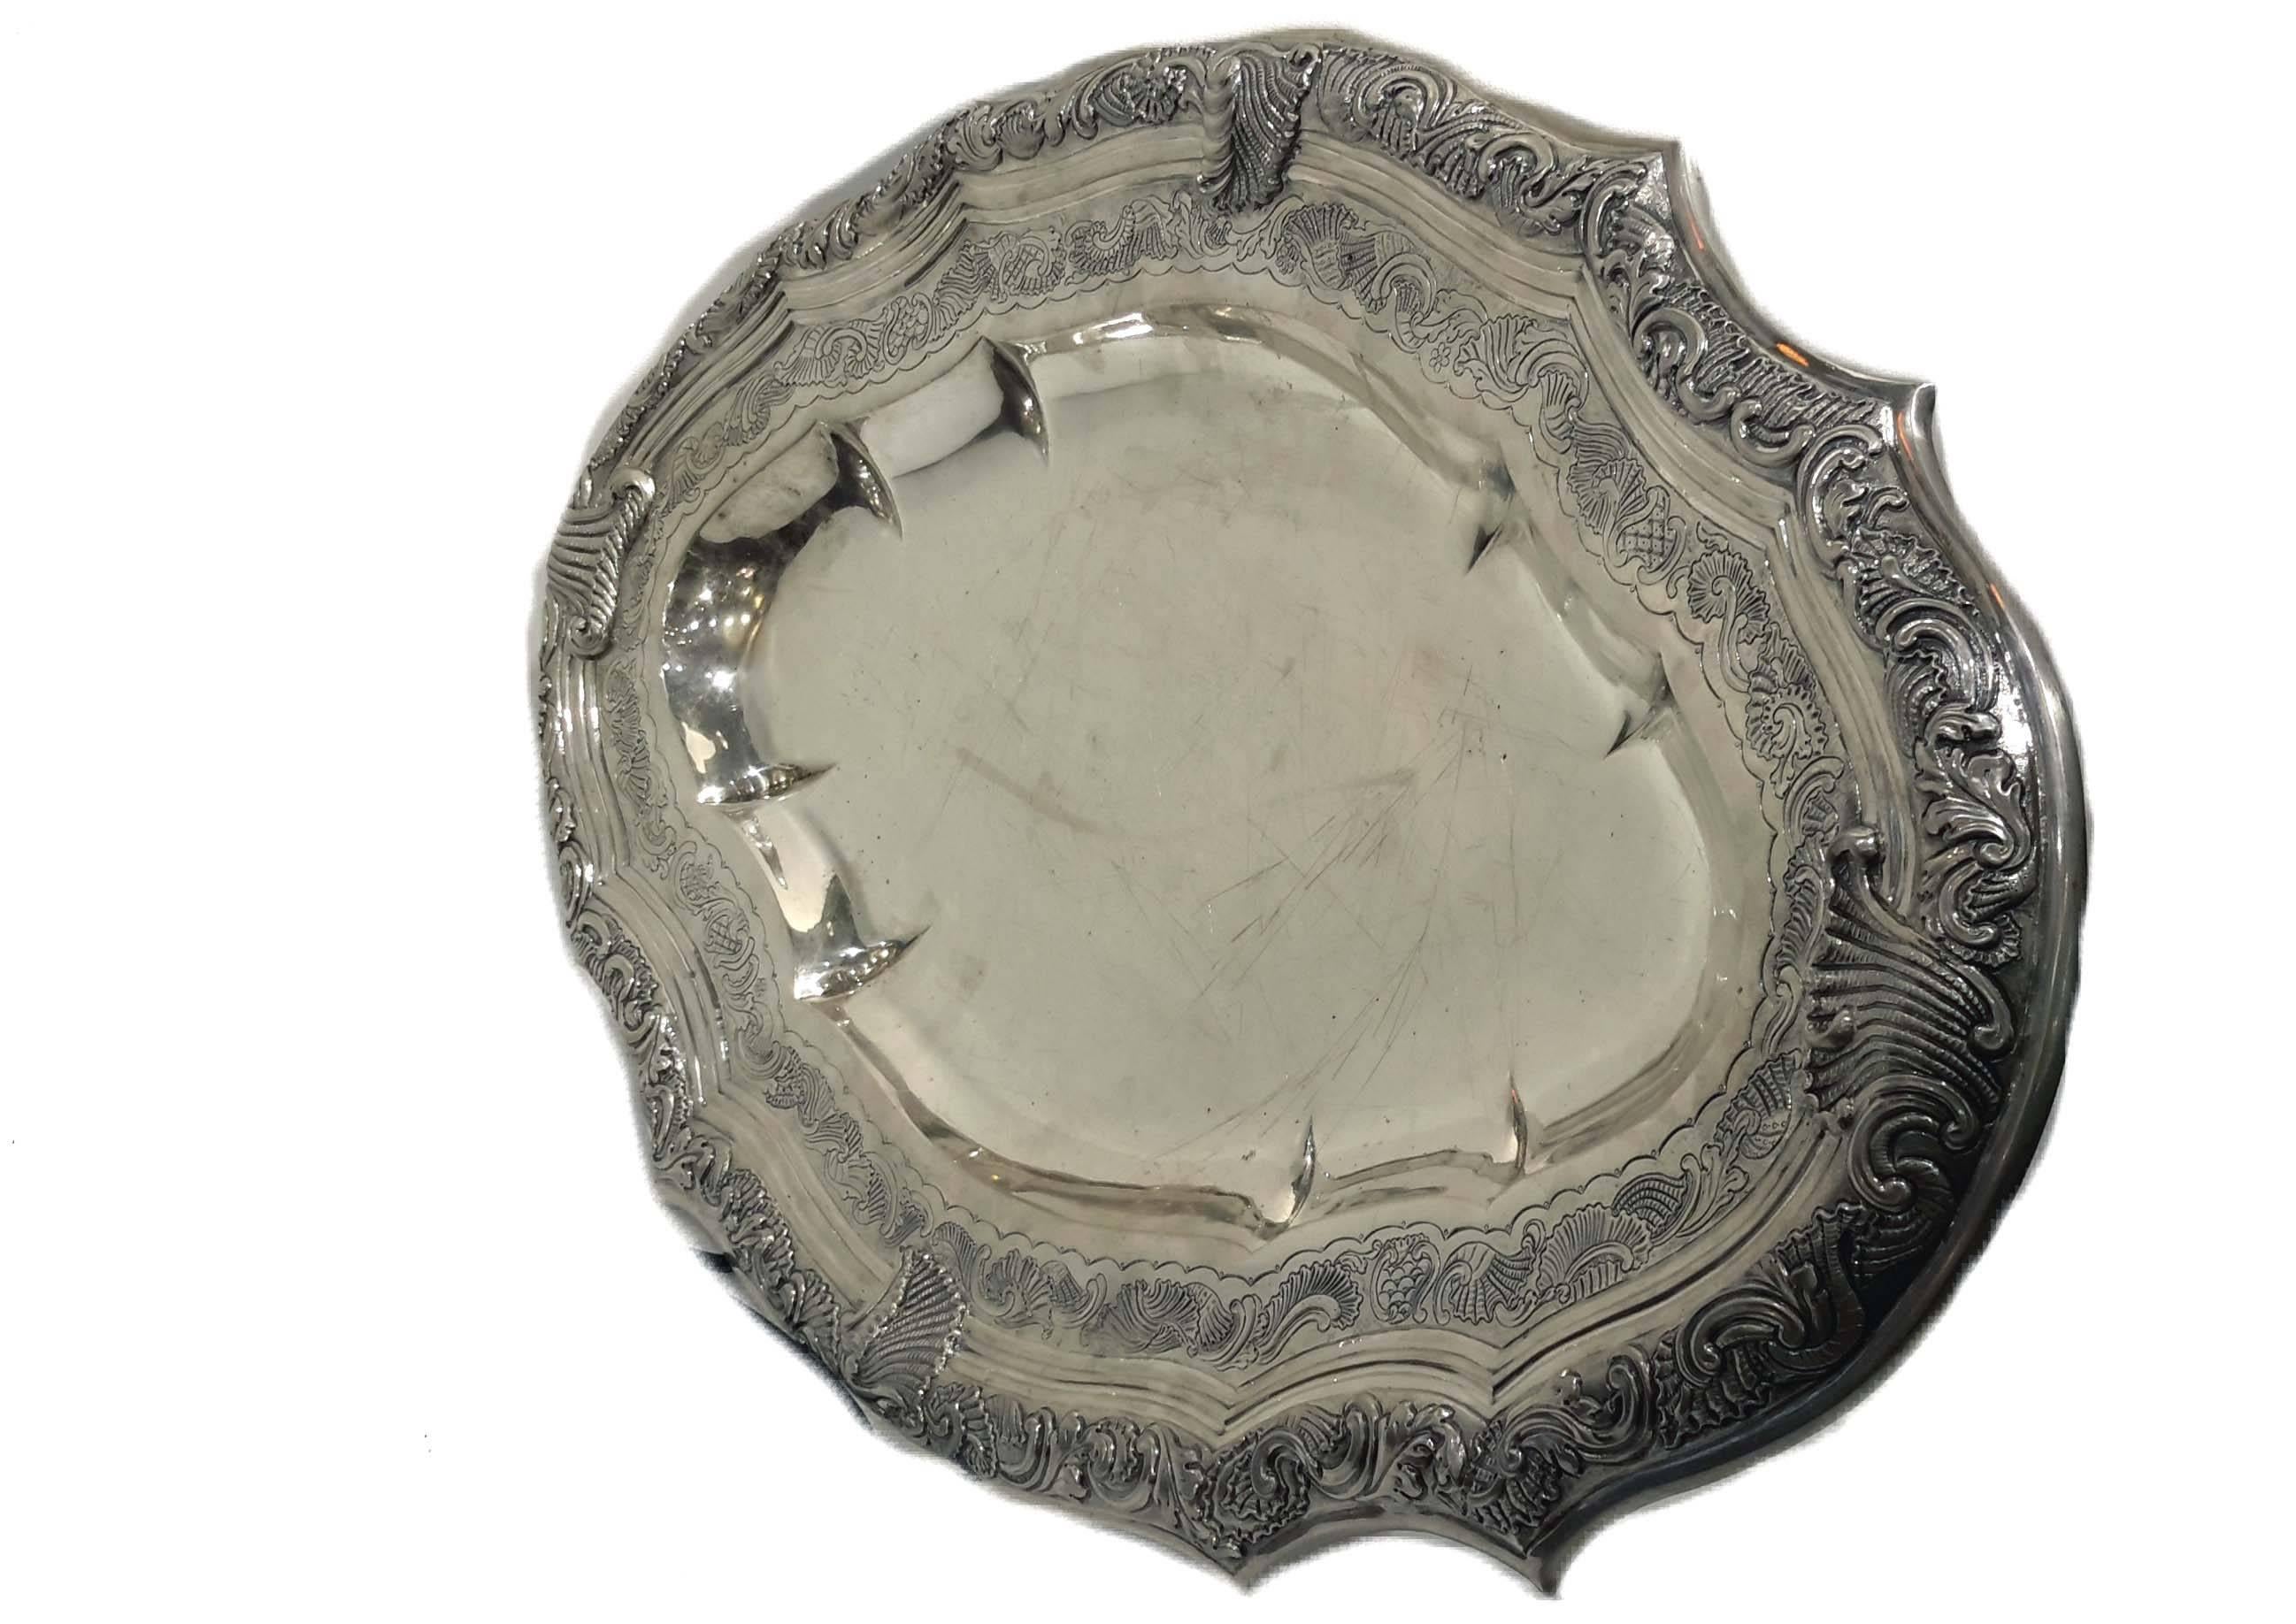 Possibly Peruvian. All hand-hammered and hand chased, circa late 18th or early 19th century.
There are only some letters and numbers engraved in the back. This platter weighs about 55 troy ounces.